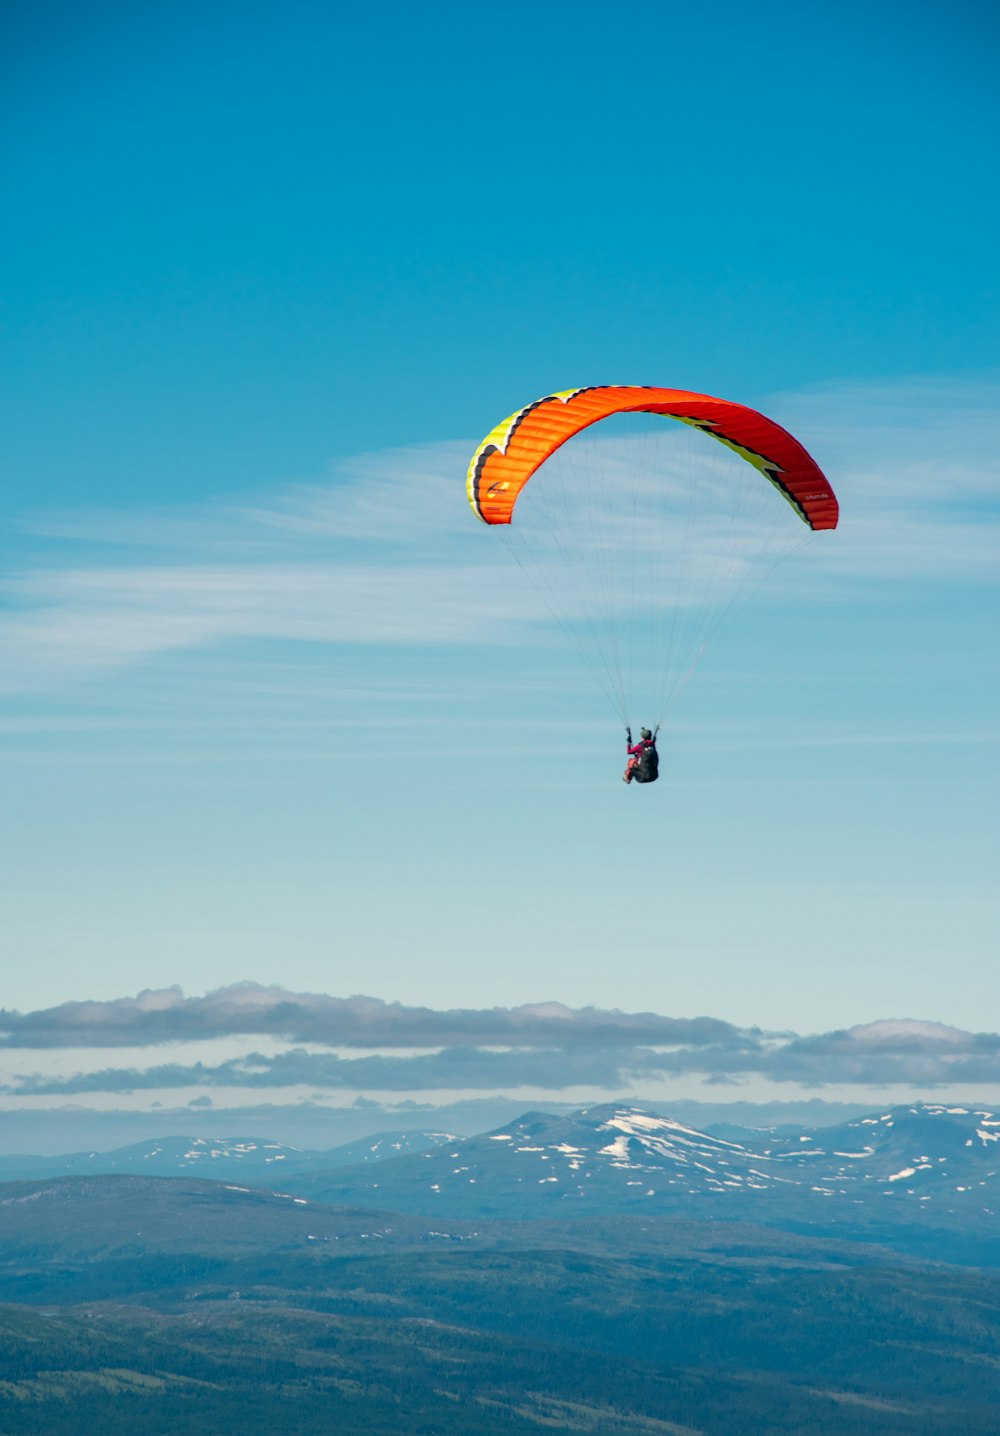 a person parasailing in the sky with mountains in the background